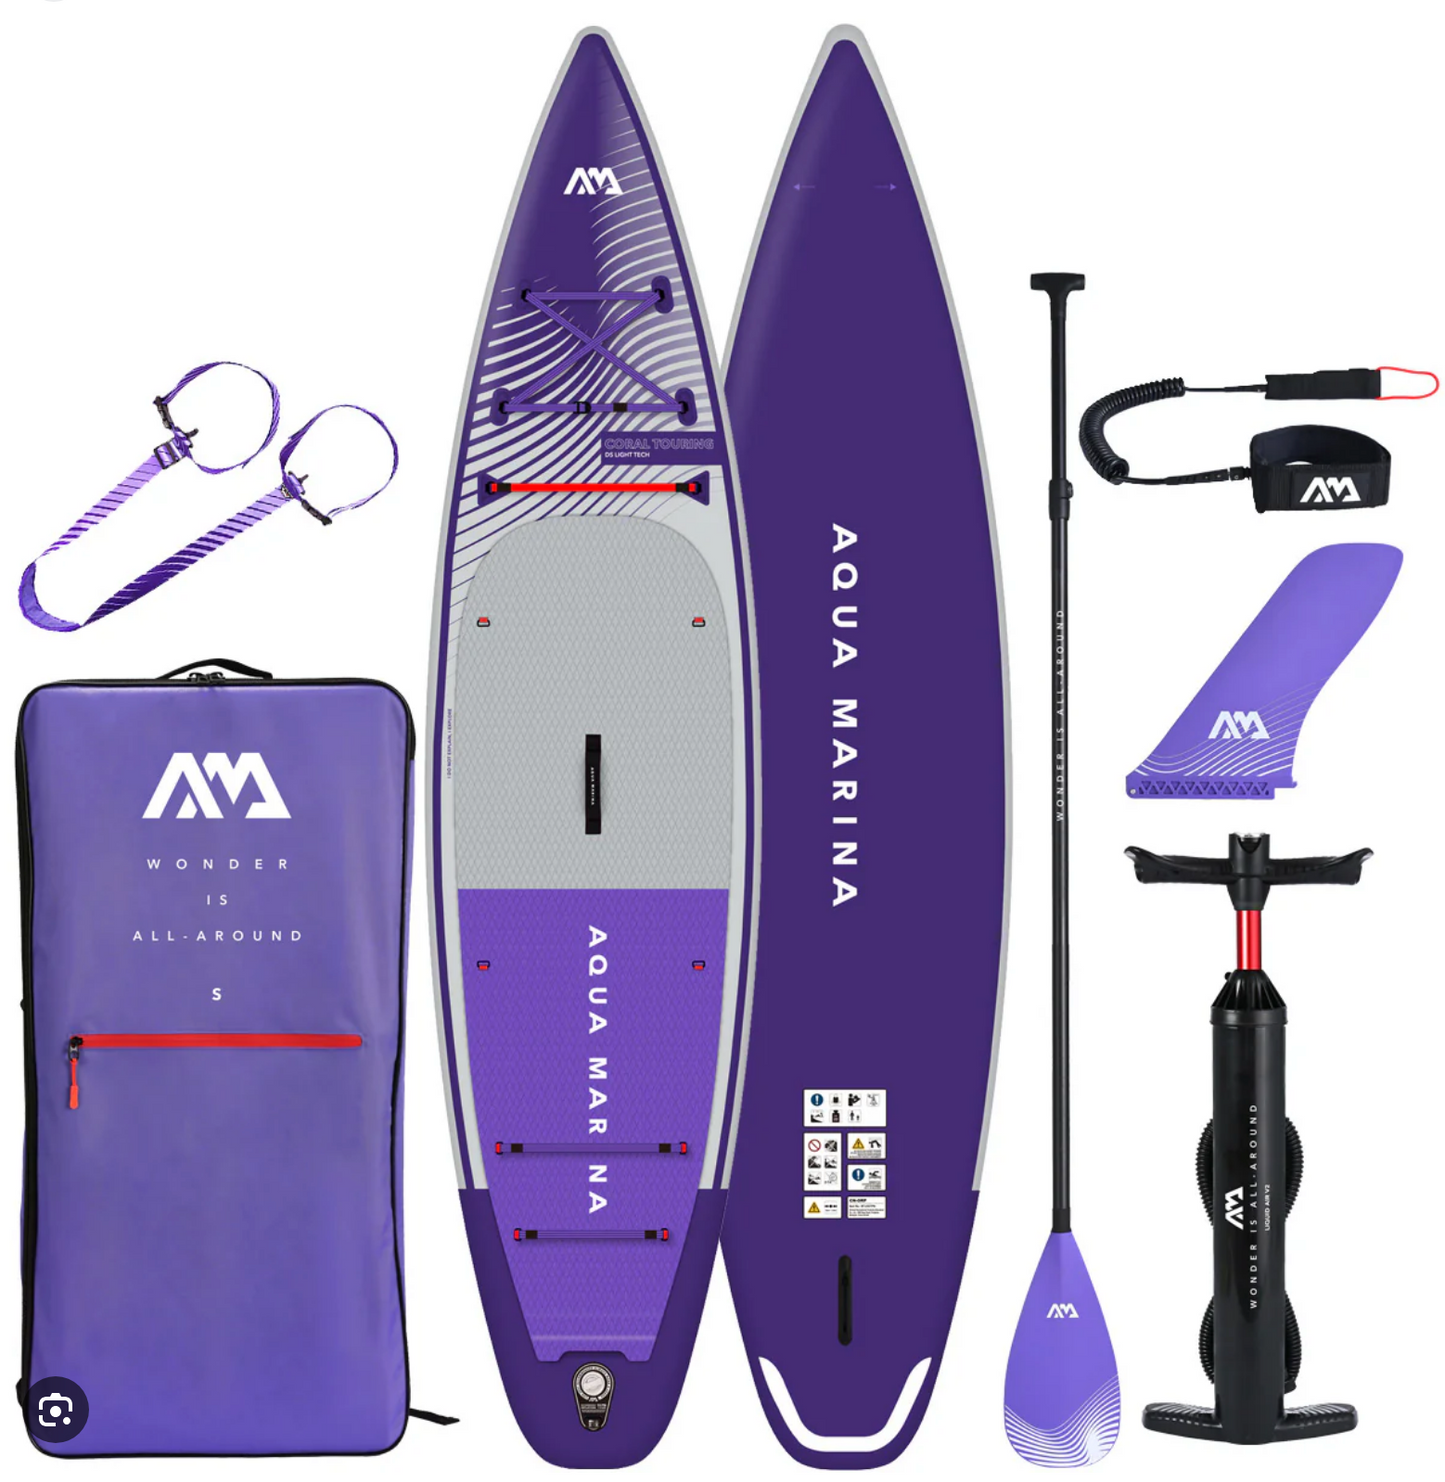 Coral Touring 11'6" Touring iSUP, 3.5m/15cm, with paddle and safety leash